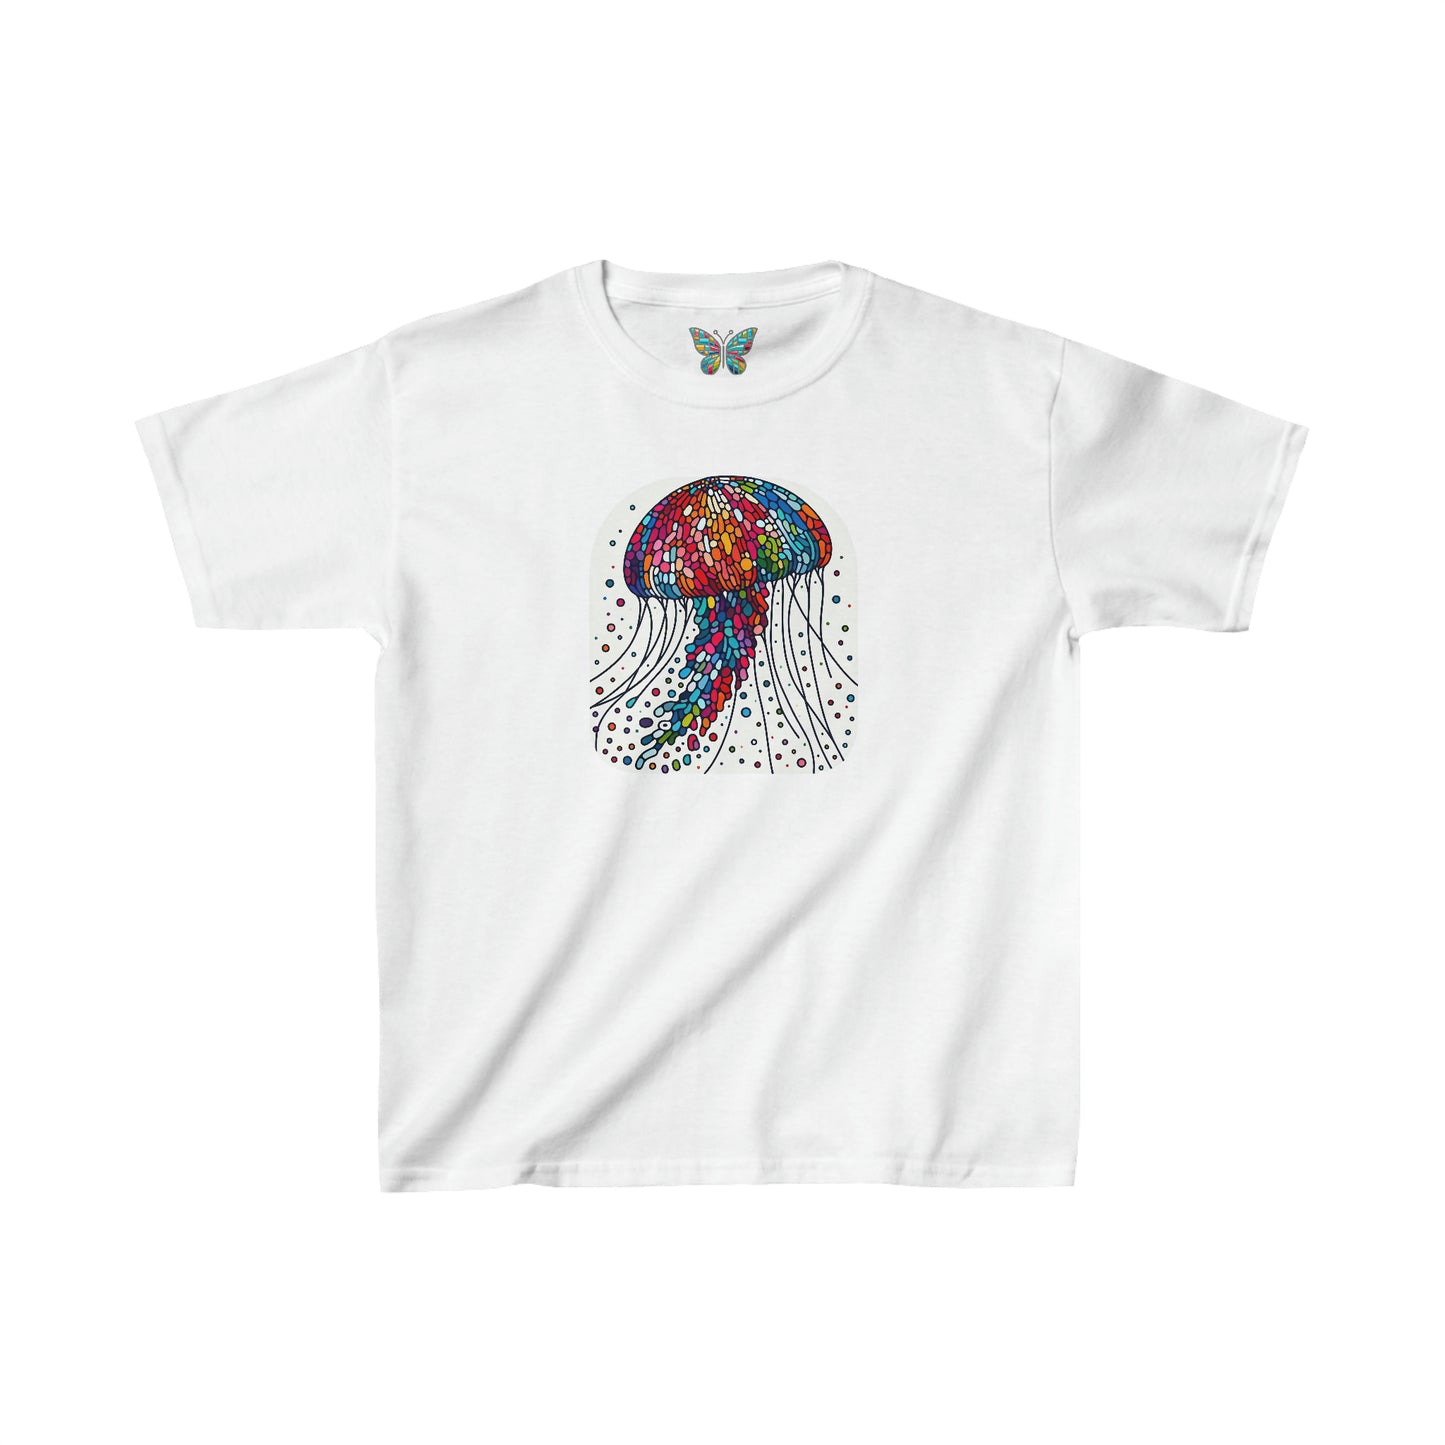 Jellyfish Dolcenea - Youth - Snazzle Tee